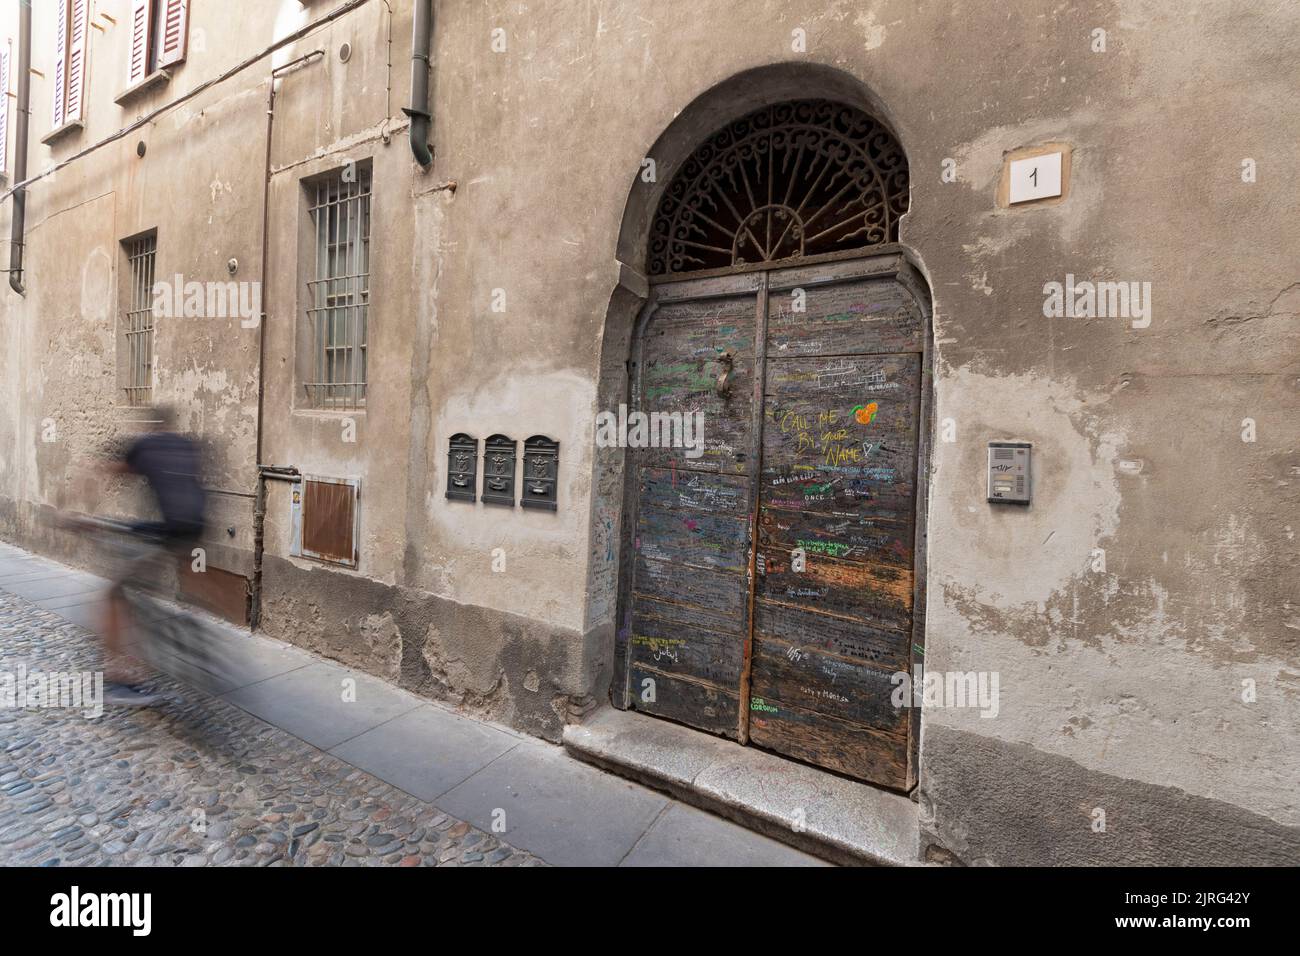 Italy, Lombardy, Crema, Old Door Used by Director Luca Guadagnino for the Scene of the Film Call Me By Your Name Stock Photo